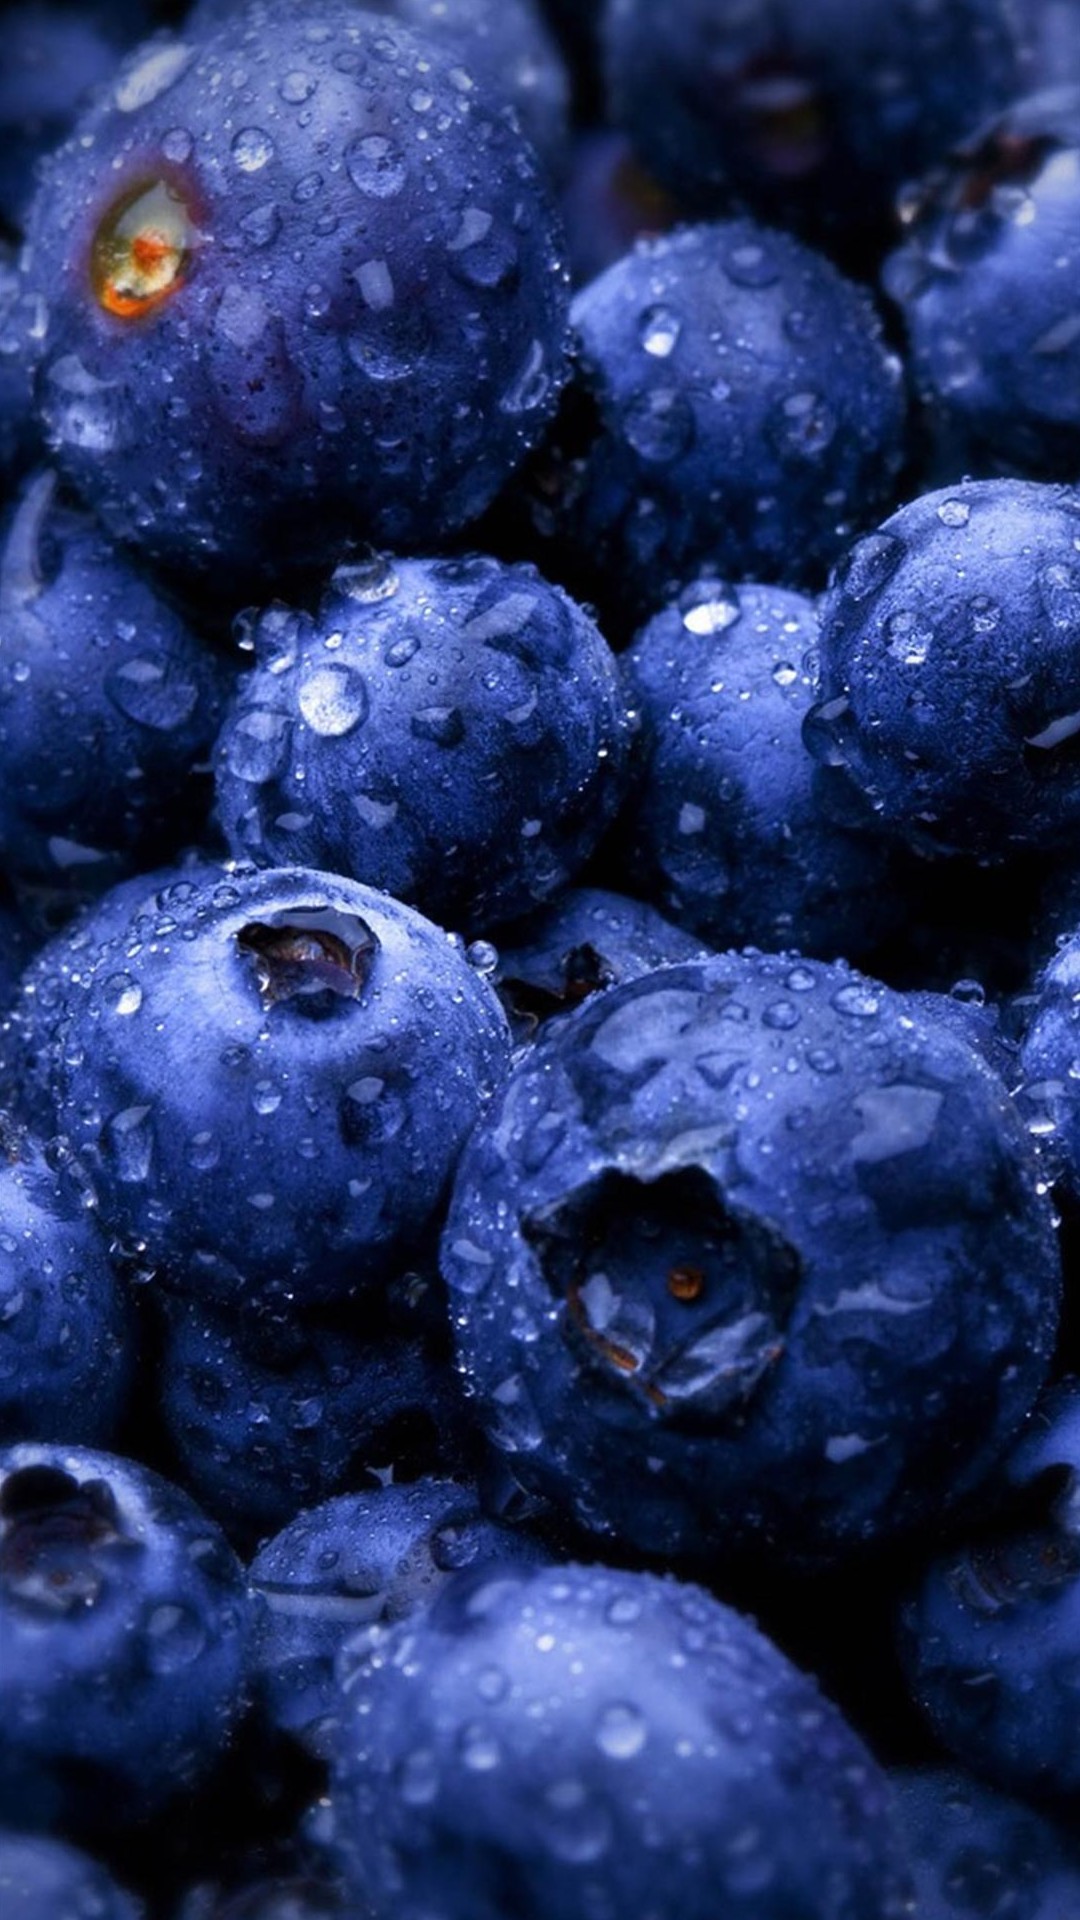 HD Blueberries Fruit Water Drops Android Wallpaper free download